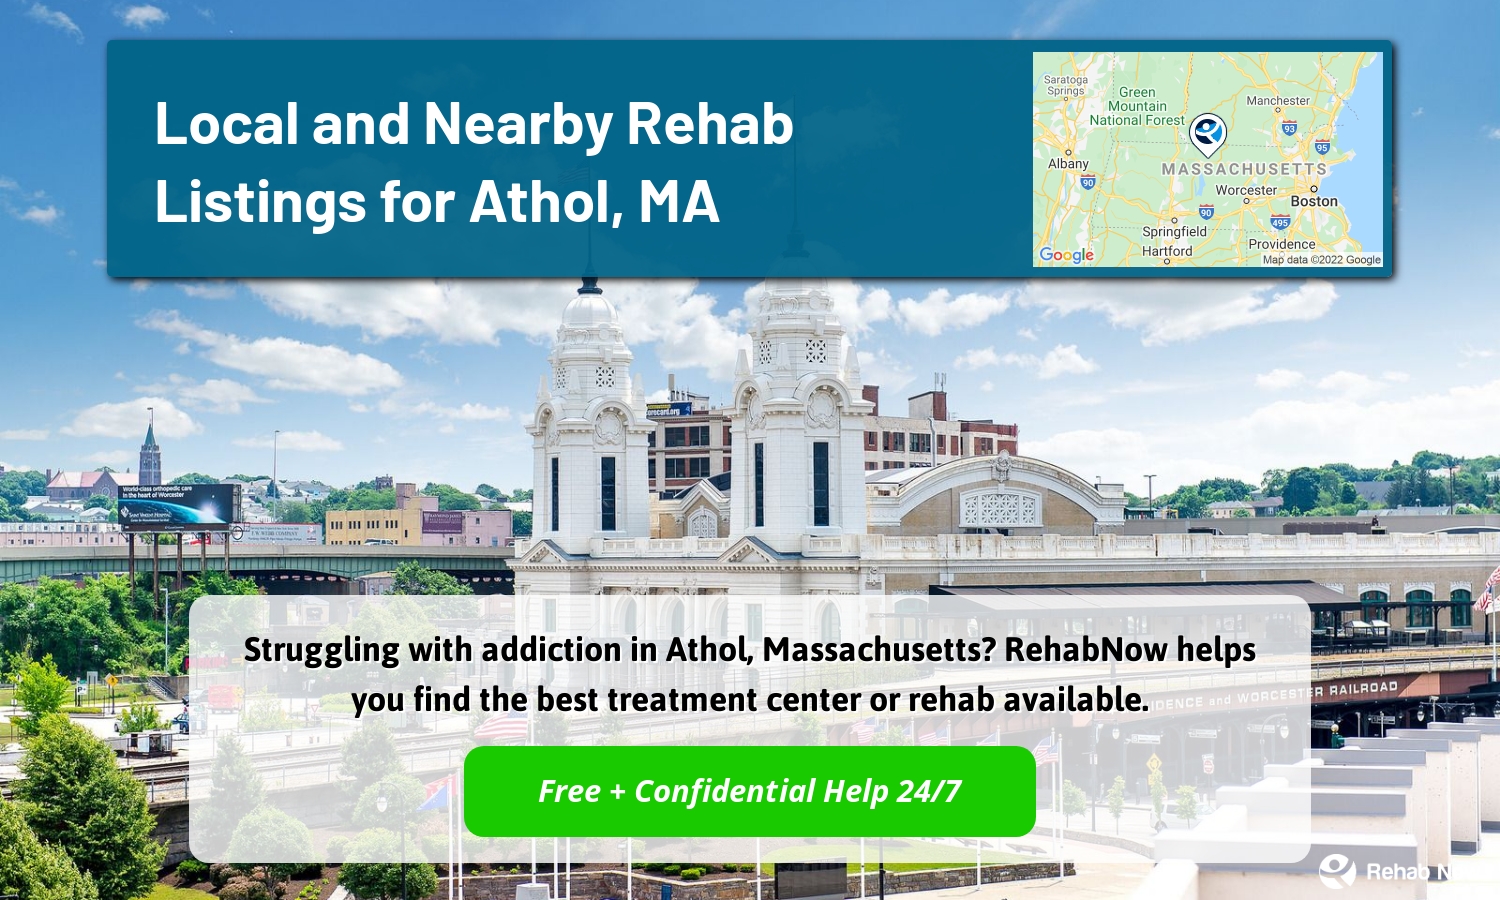 Struggling with addiction in Athol, Massachusetts? RehabNow helps you find the best treatment center or rehab available.